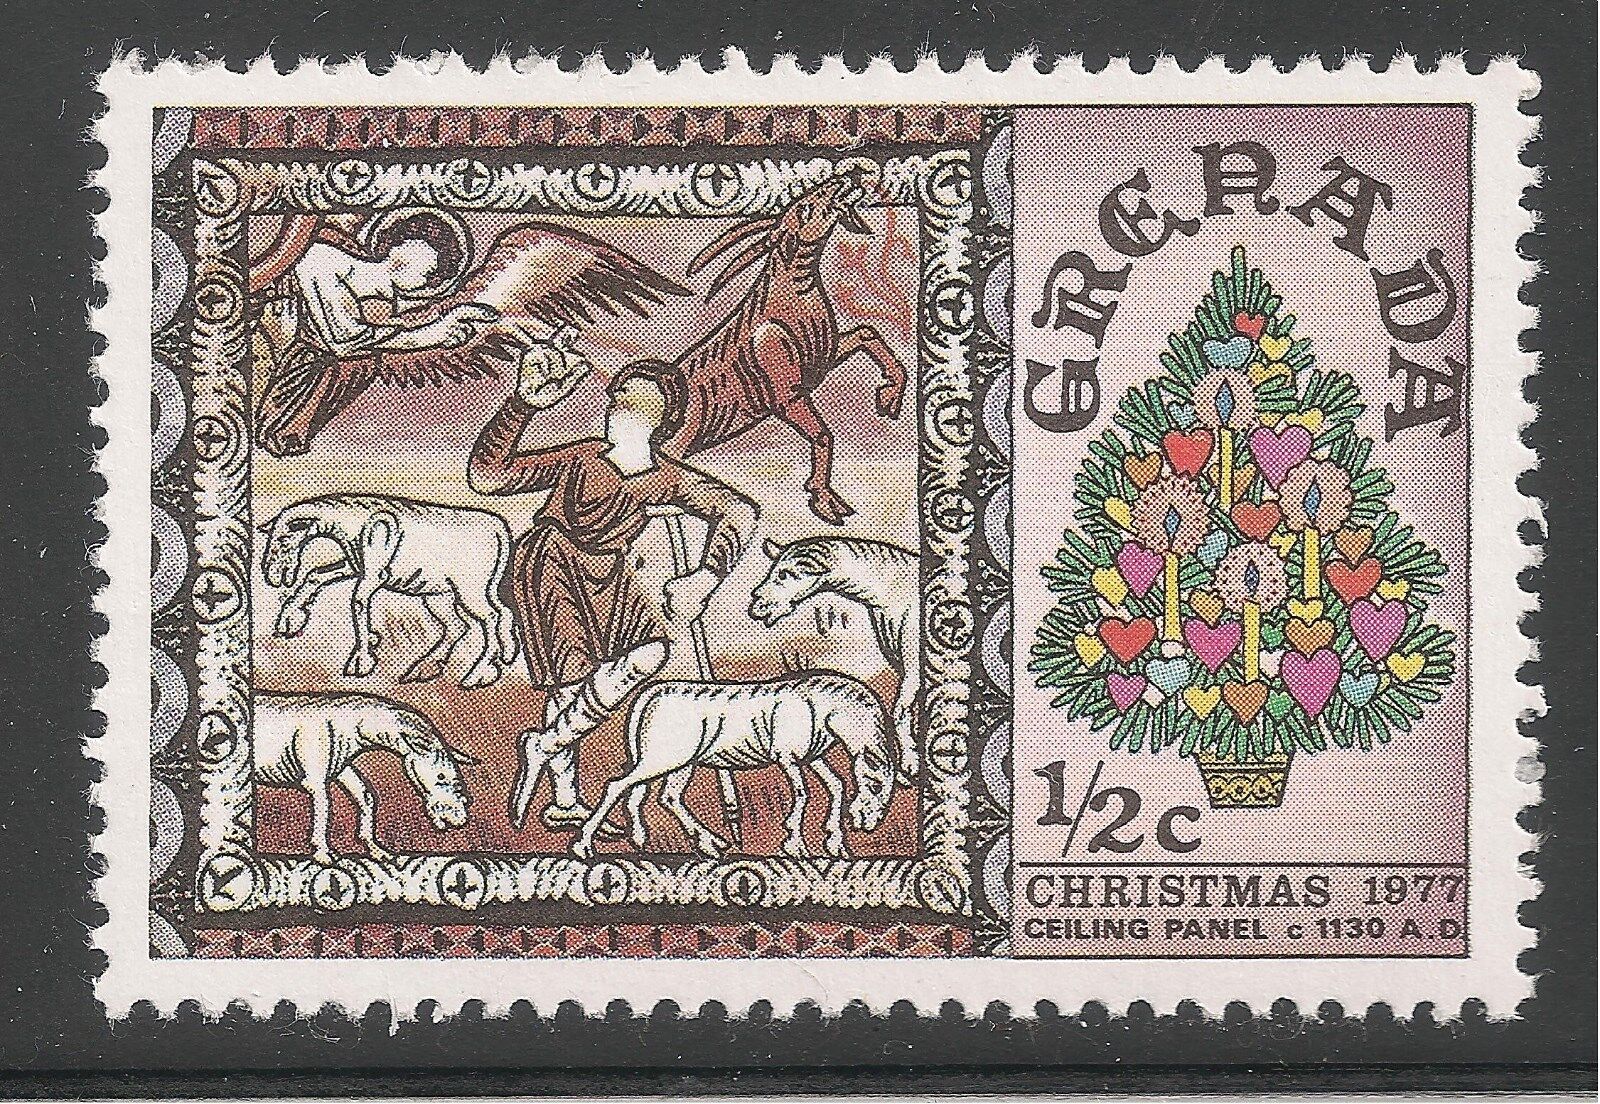 Grenada #813 Vf Mnh - 1977 Annunciation To The Shepherds - Ceiling Painting